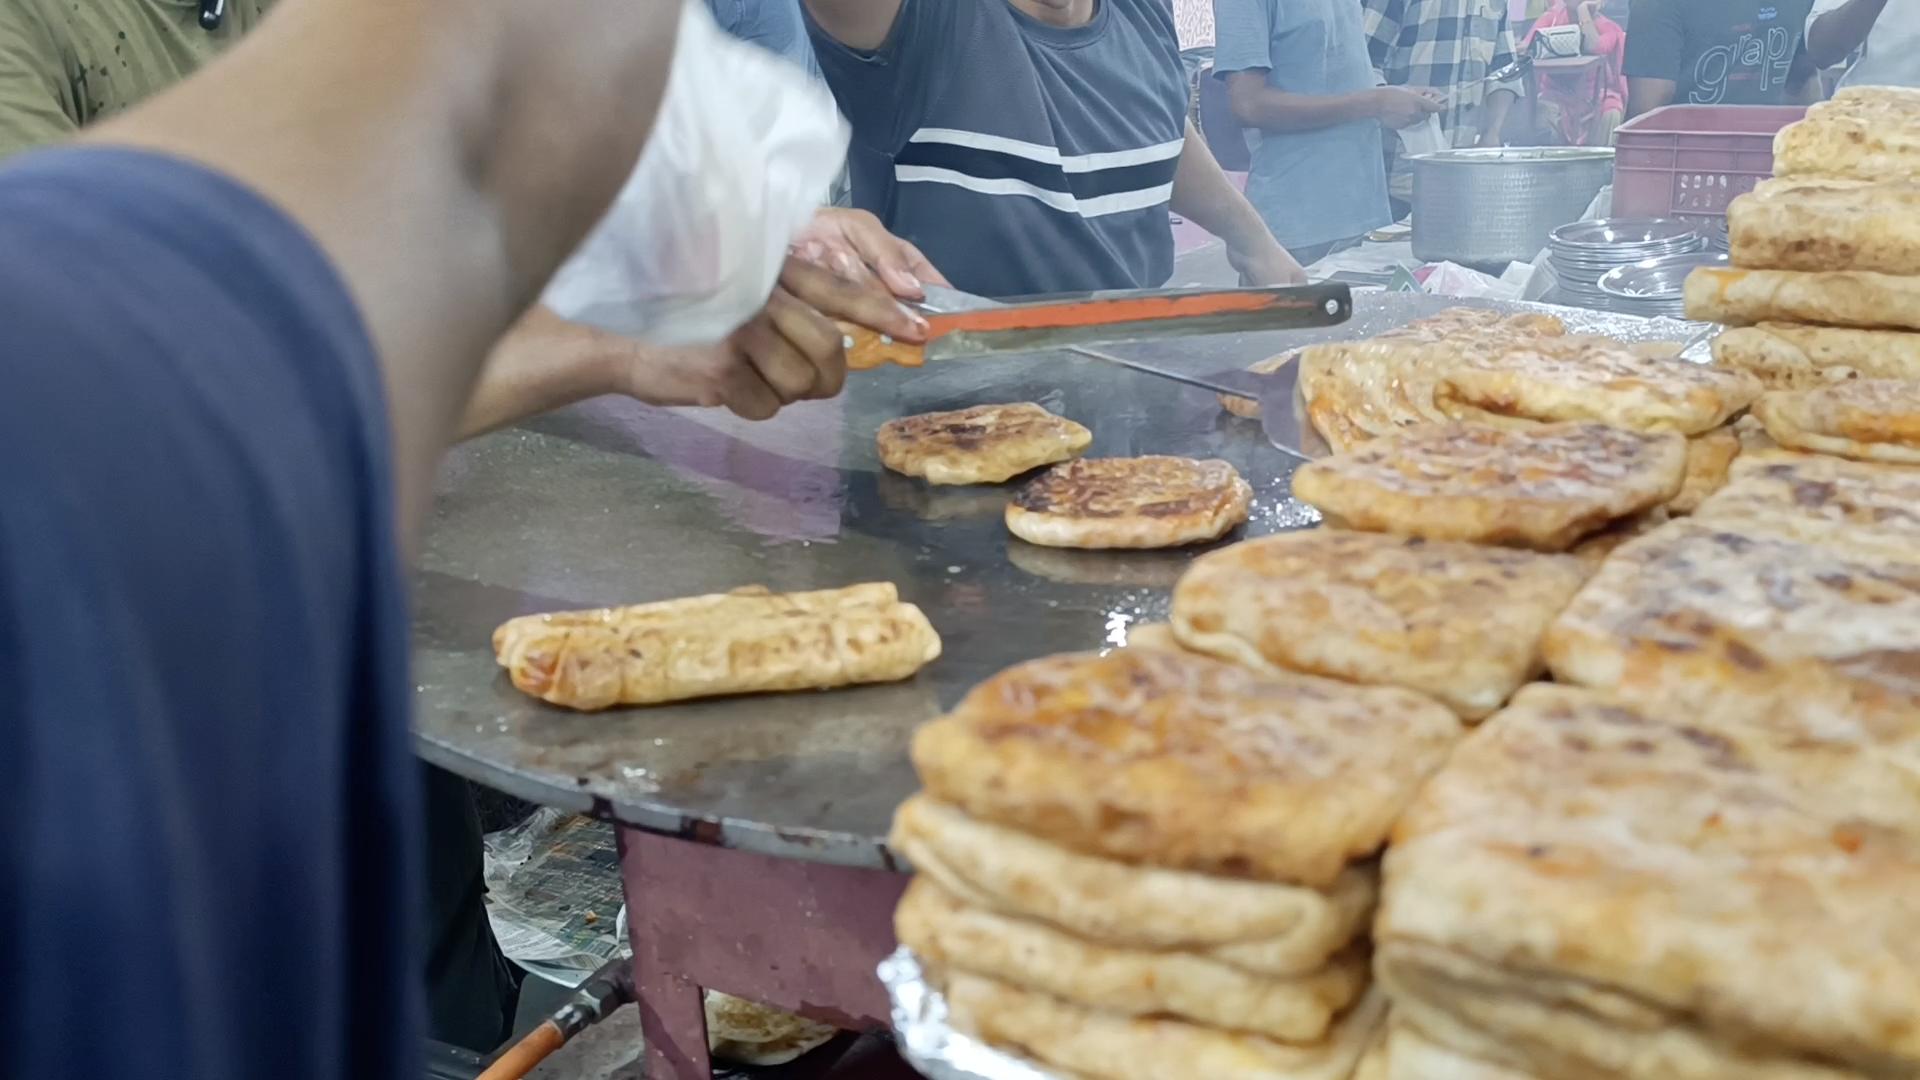 Mumbai’s special Baida Roti If you haven’t tasted Baida Roti, you are missing out on a food fortune! Indulge in delicious Baida Roti at these lesser-explored stalls on Mira Road. Not only is it delicate in texture but is also a blast of flavours in your mouth